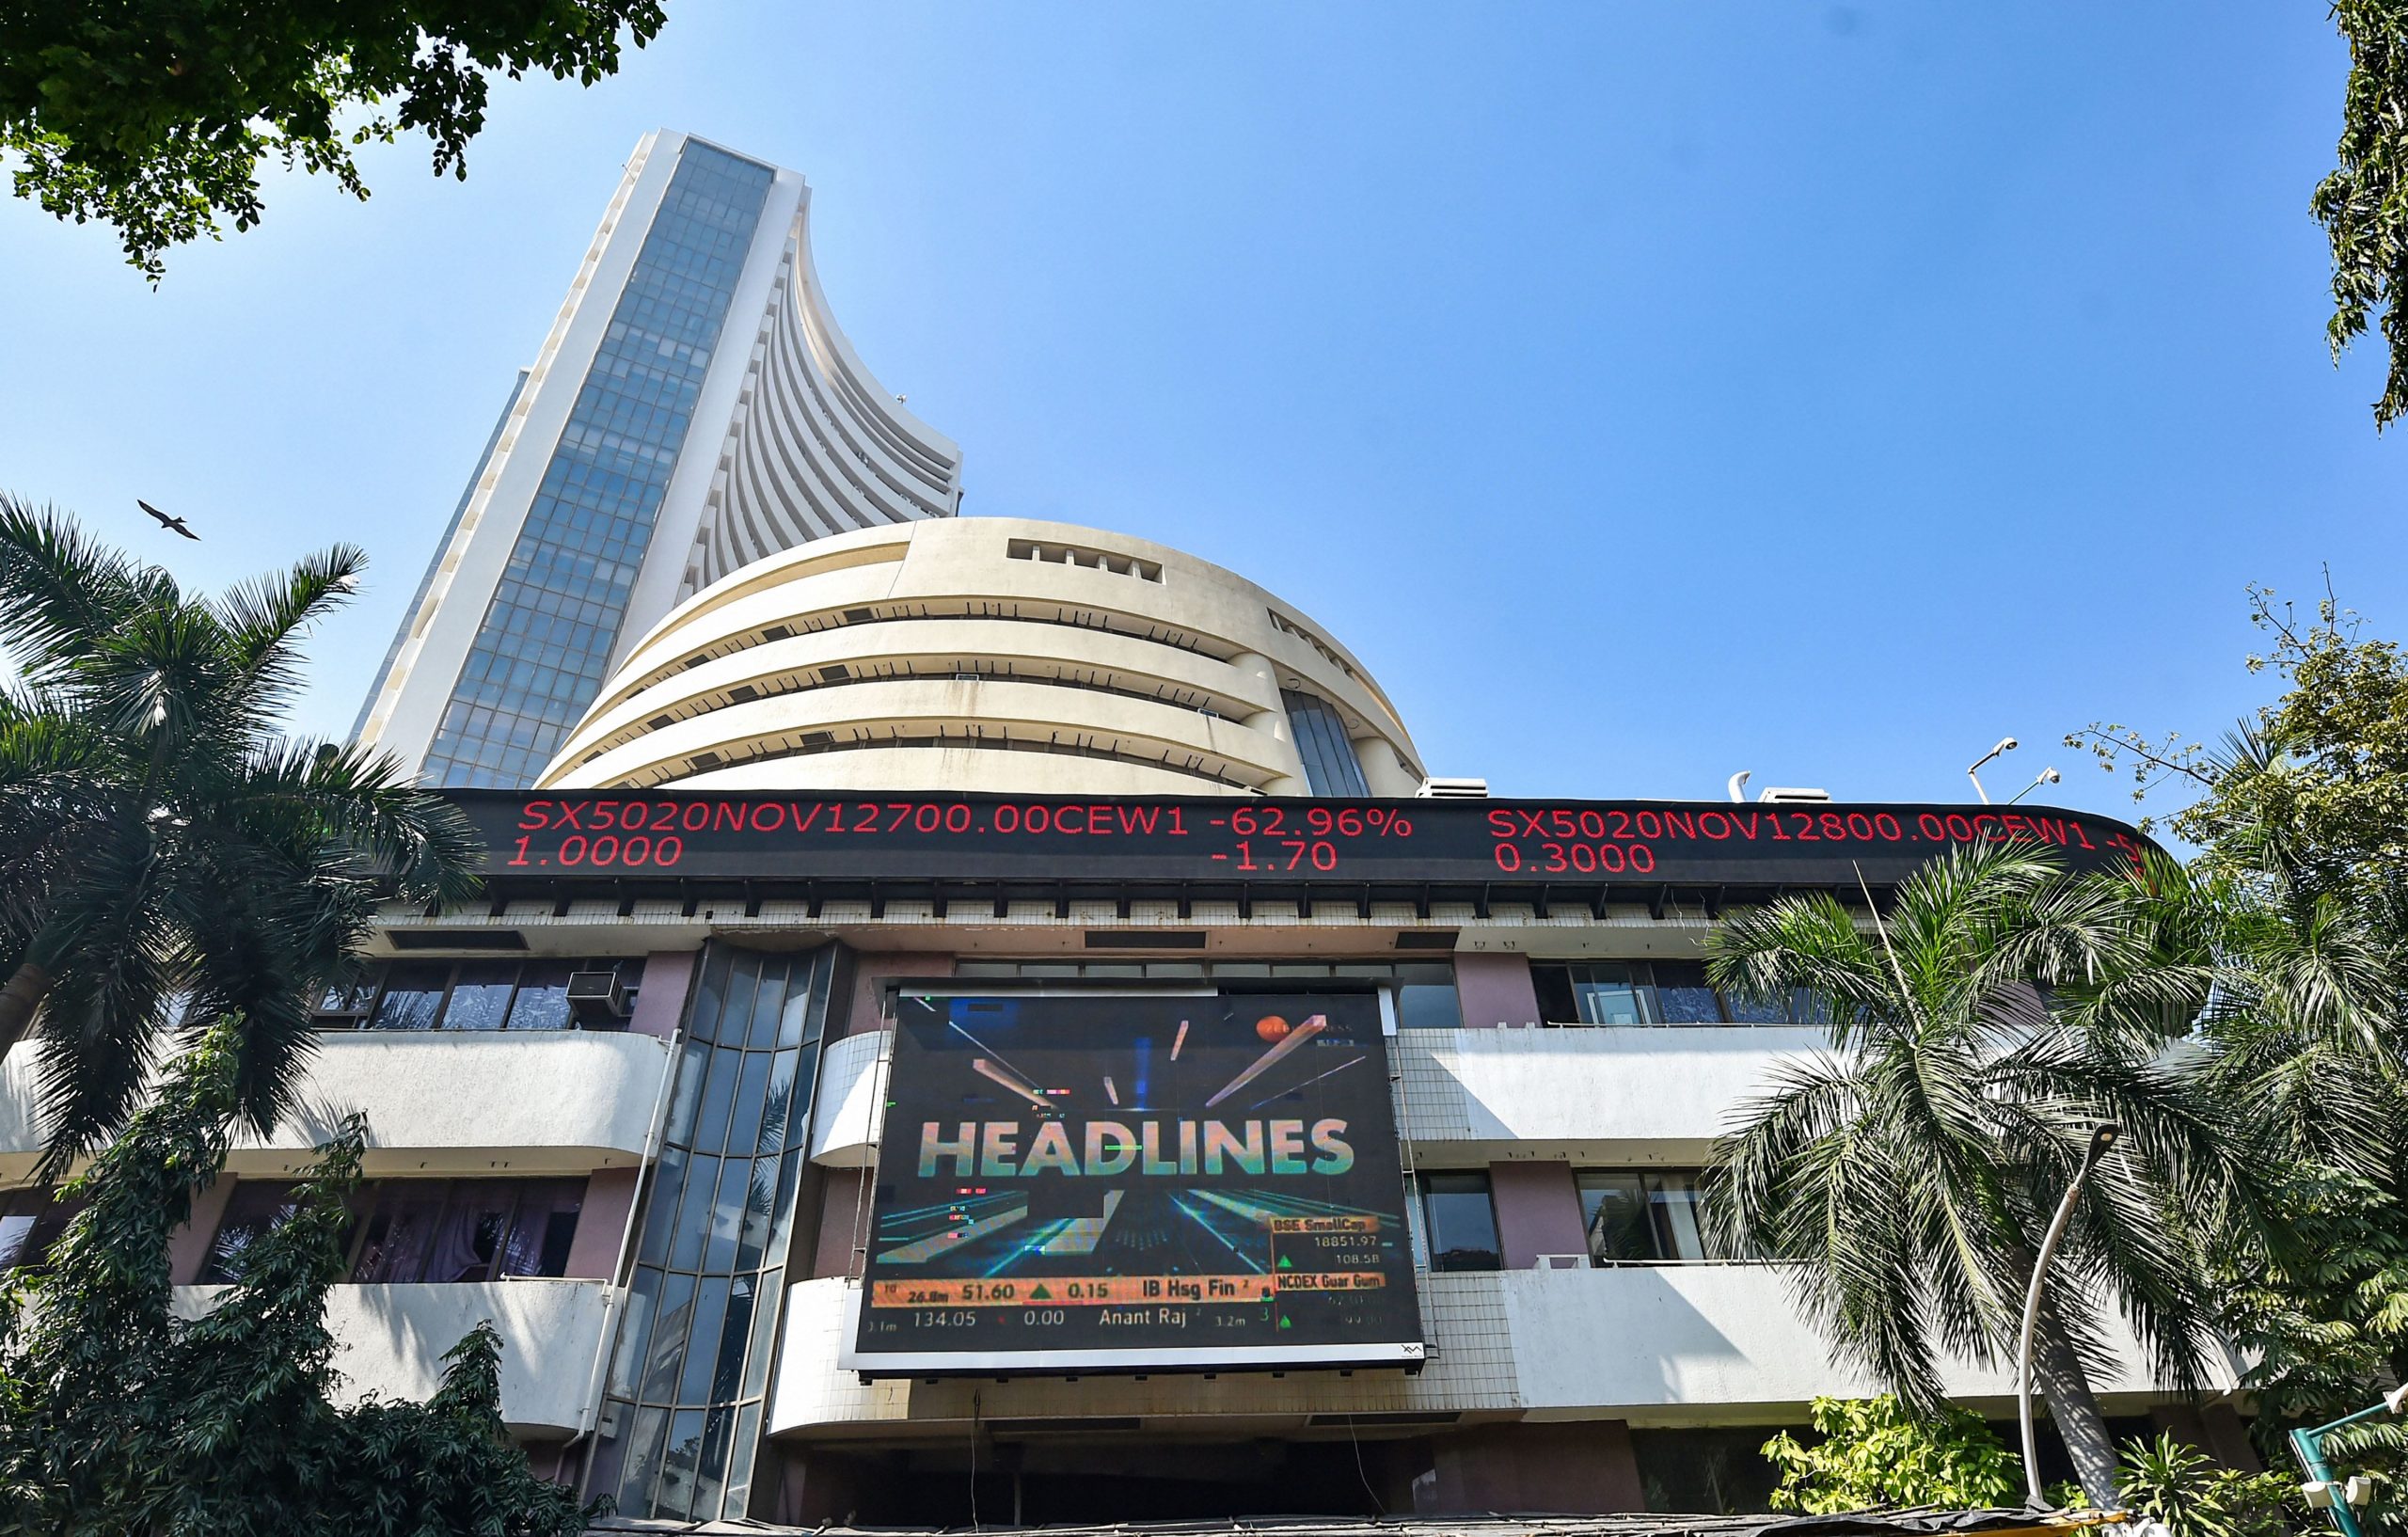 Trending Stocks: Adani Green, Subex, Voltas, ITC and others in news today